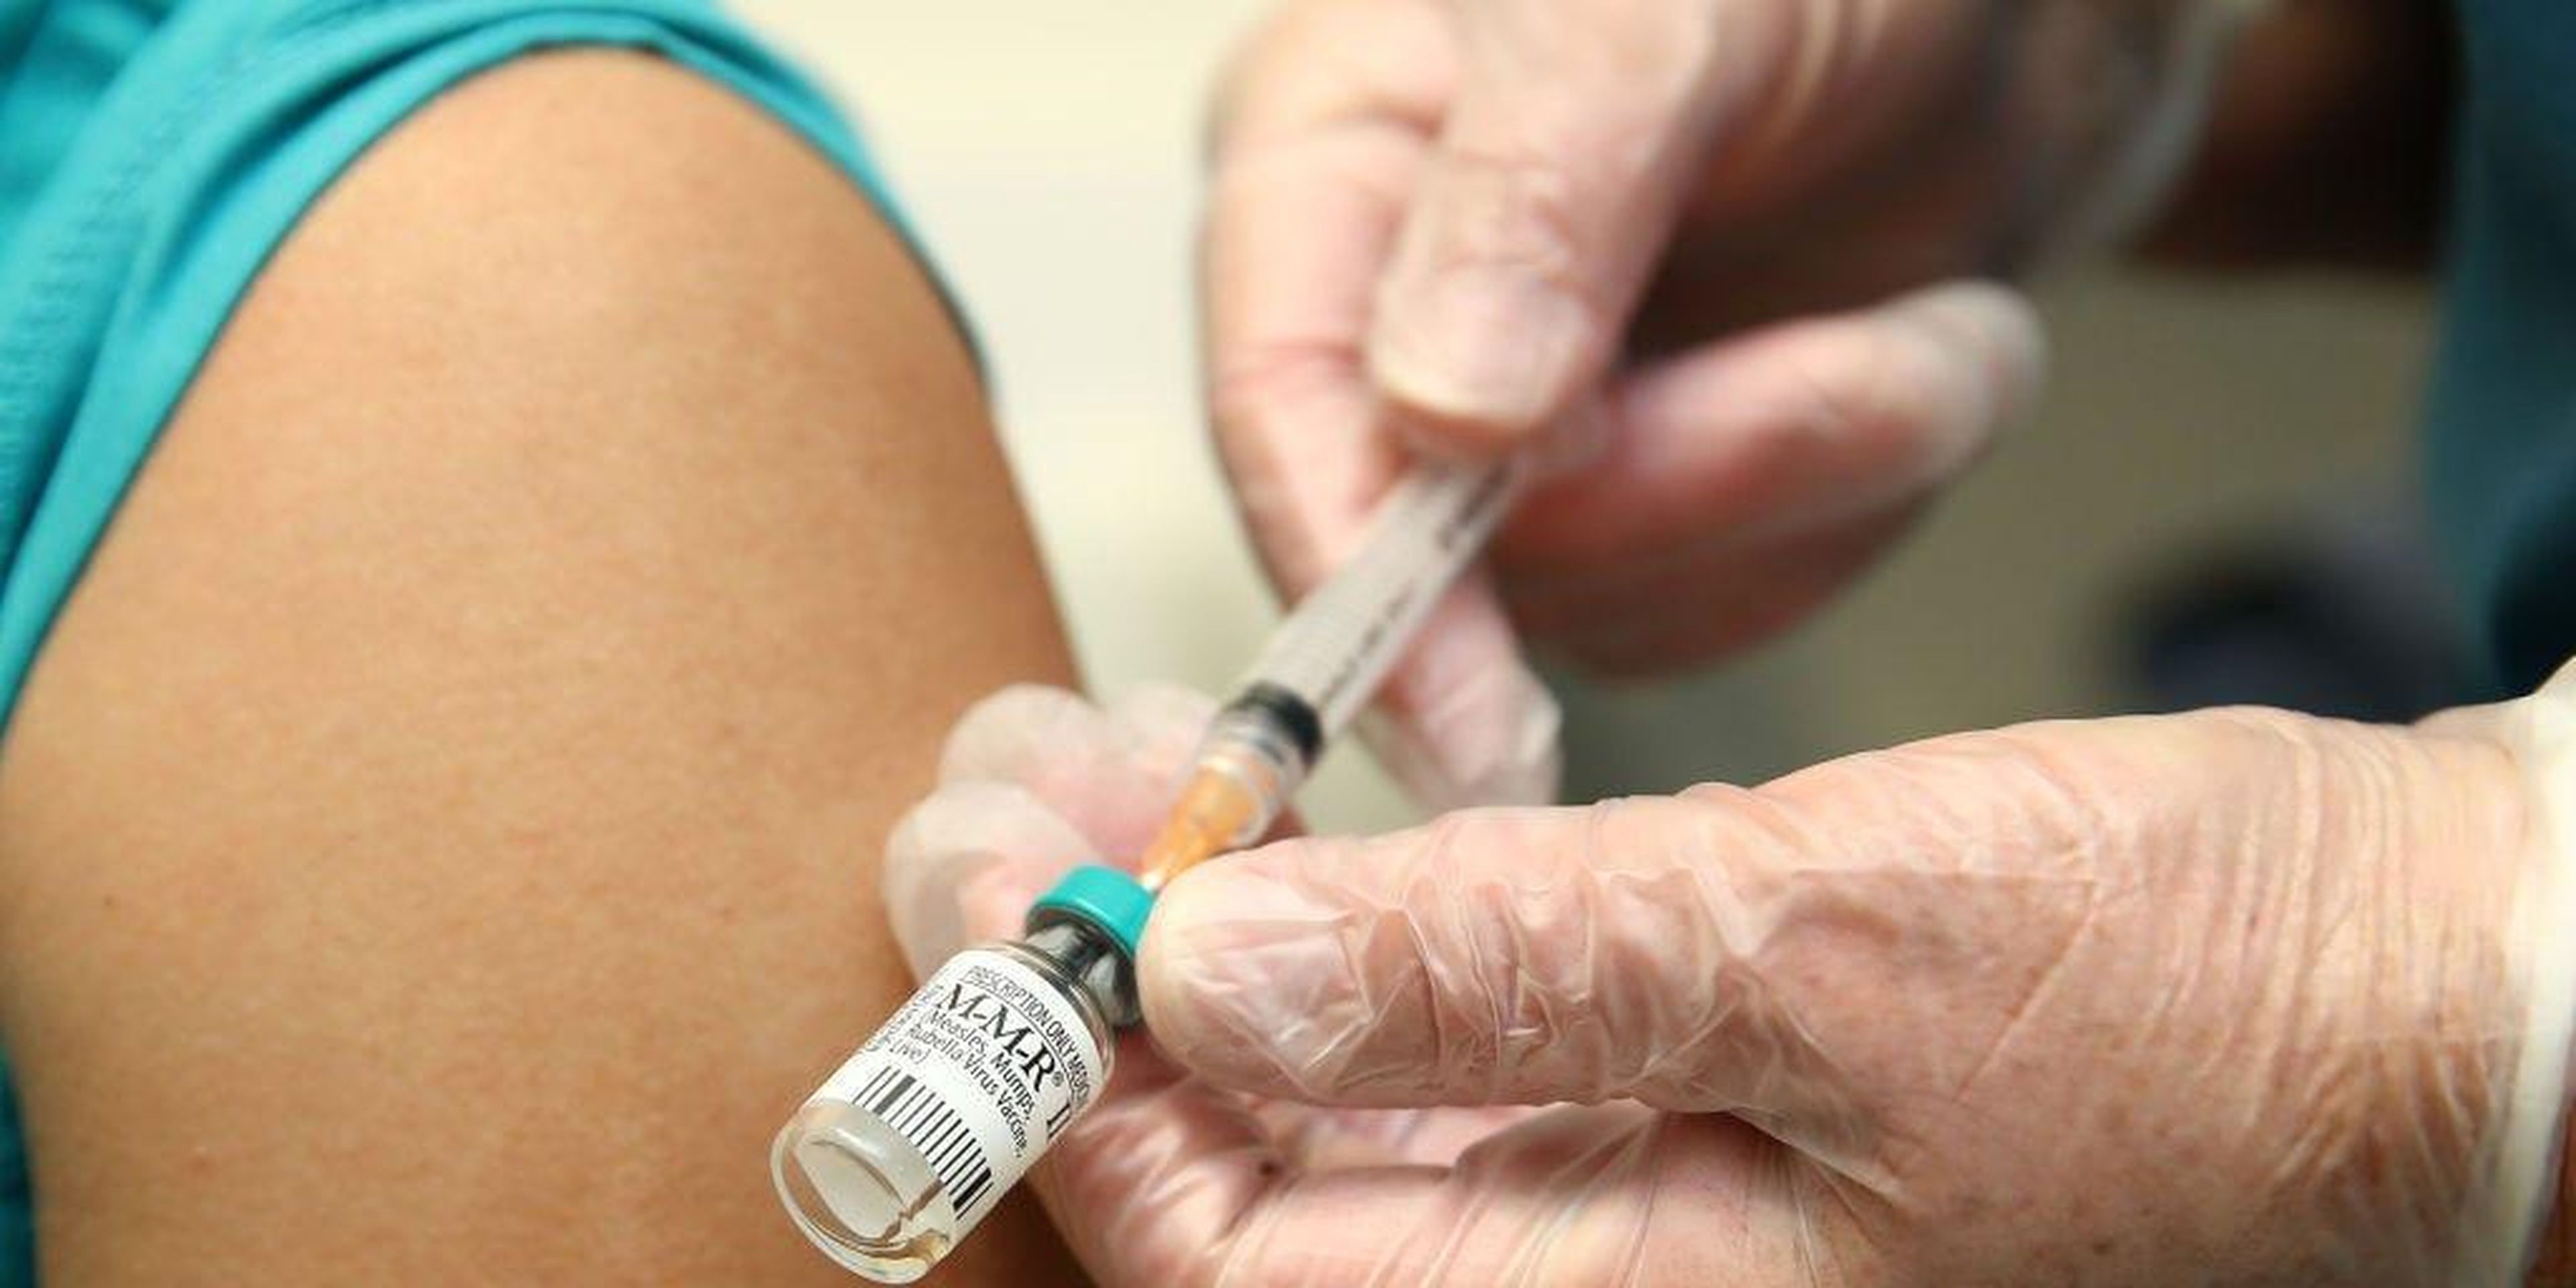 A medical worker preparing a measles vaccine on September 10 in Auckland, New Zealand.